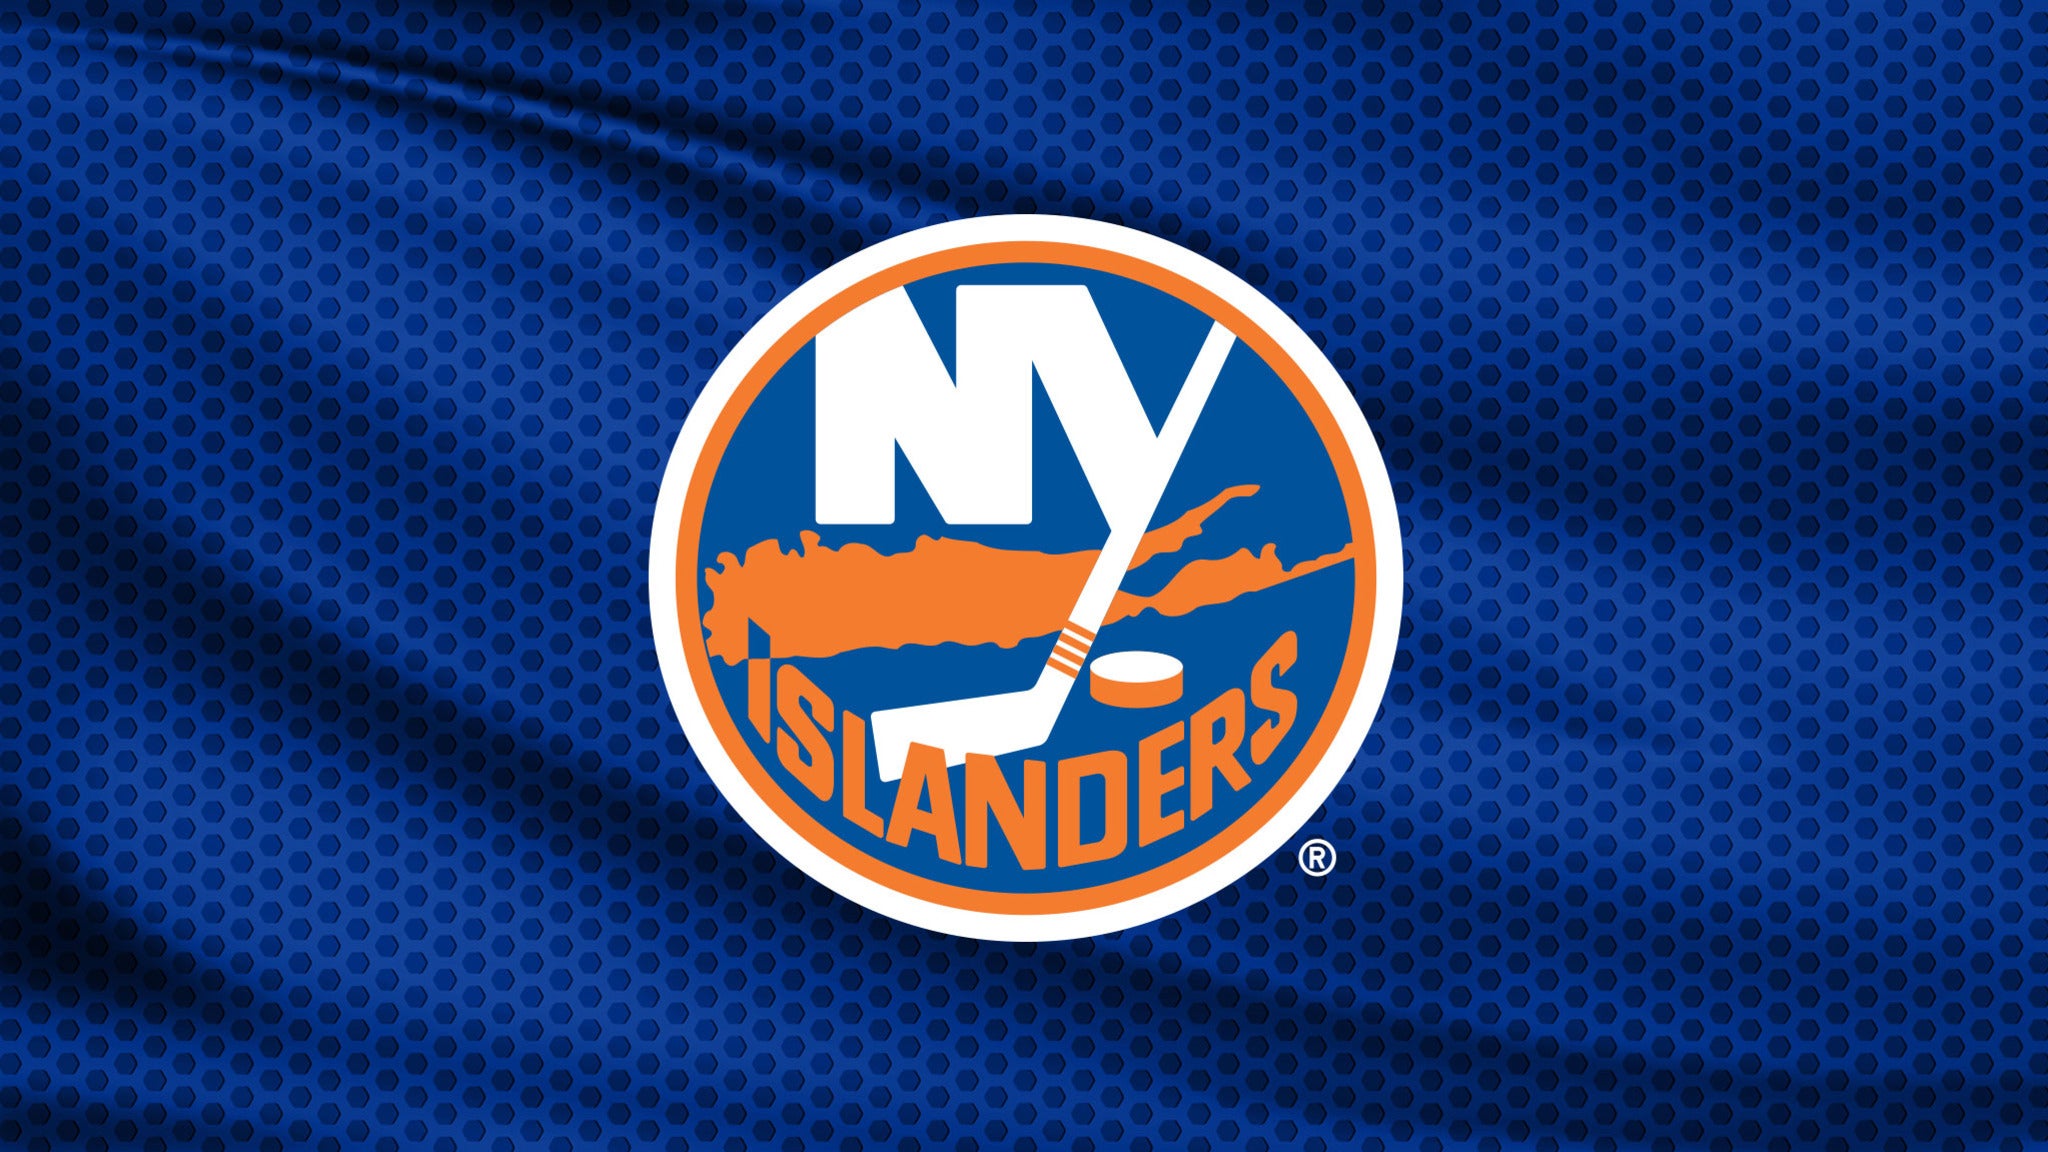 New York Islanders vs. Florida Panthers in Belmont Park - Long Island event information